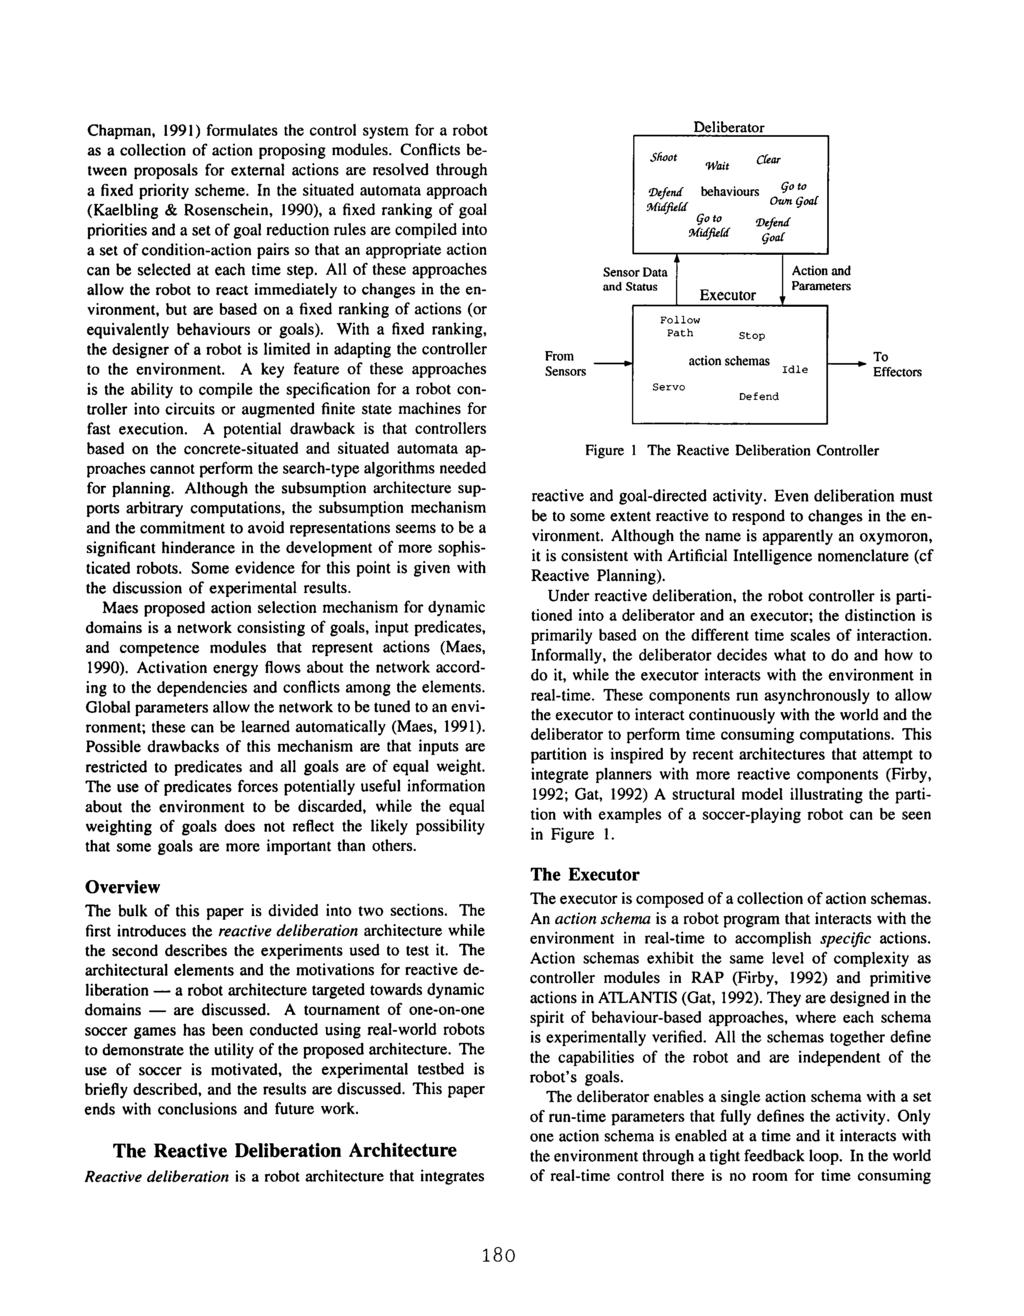 Chapman, 1991) formulates the control system for a robot as a collection of action proposing modules. Conflicts between proposals for external actions are resolved through a fixed priority scheme.